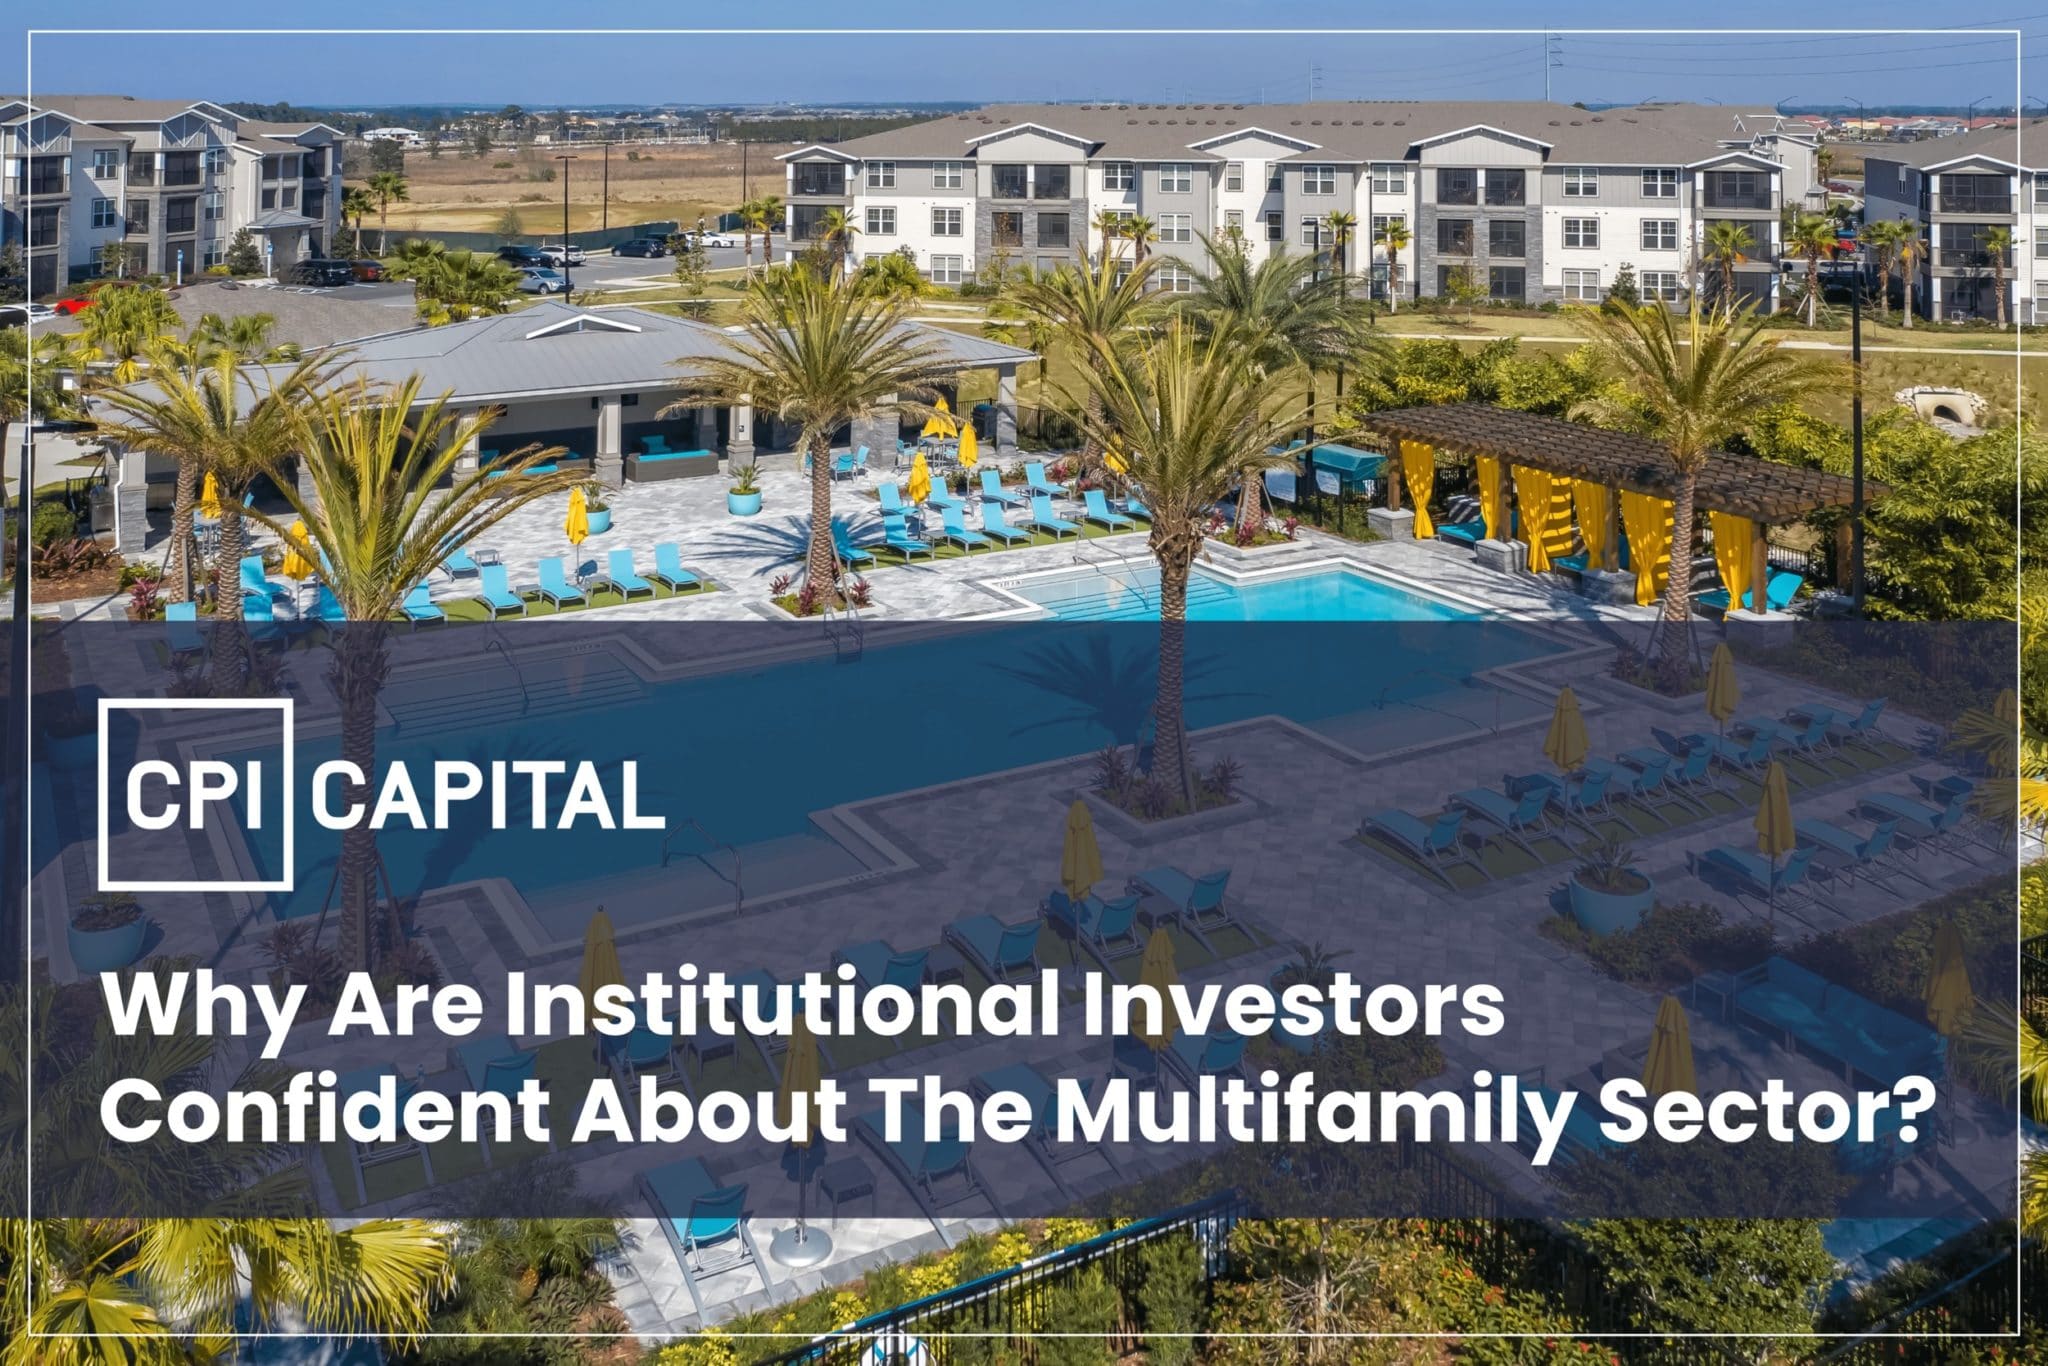 Why Institutional Investors are confident about the multi-family sector